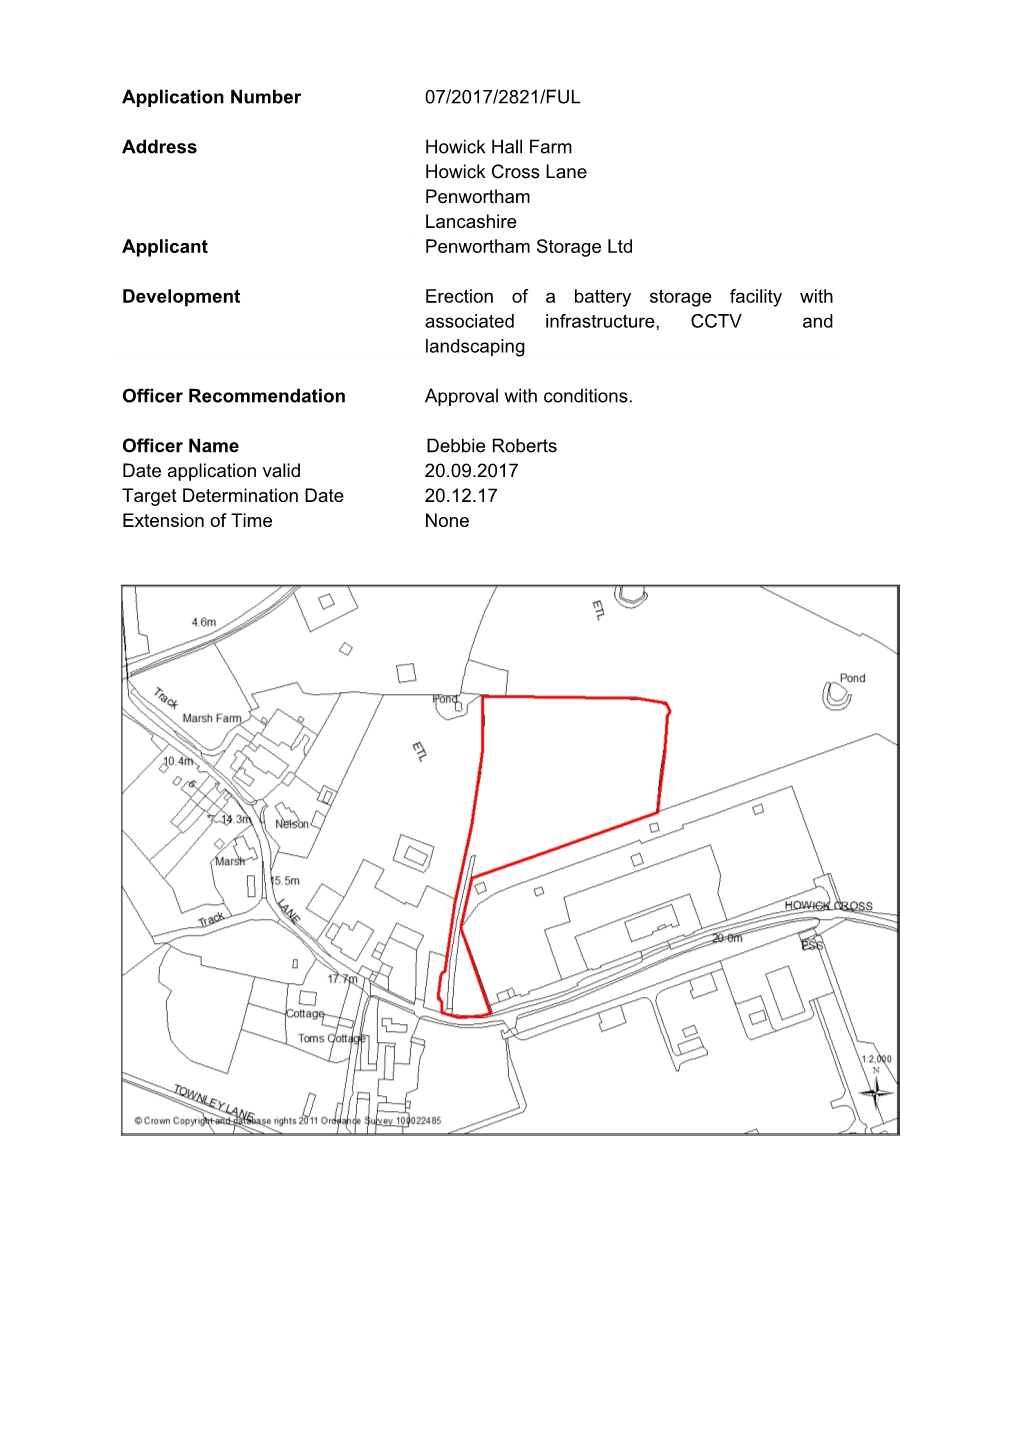 Application Site and Surrounding Area